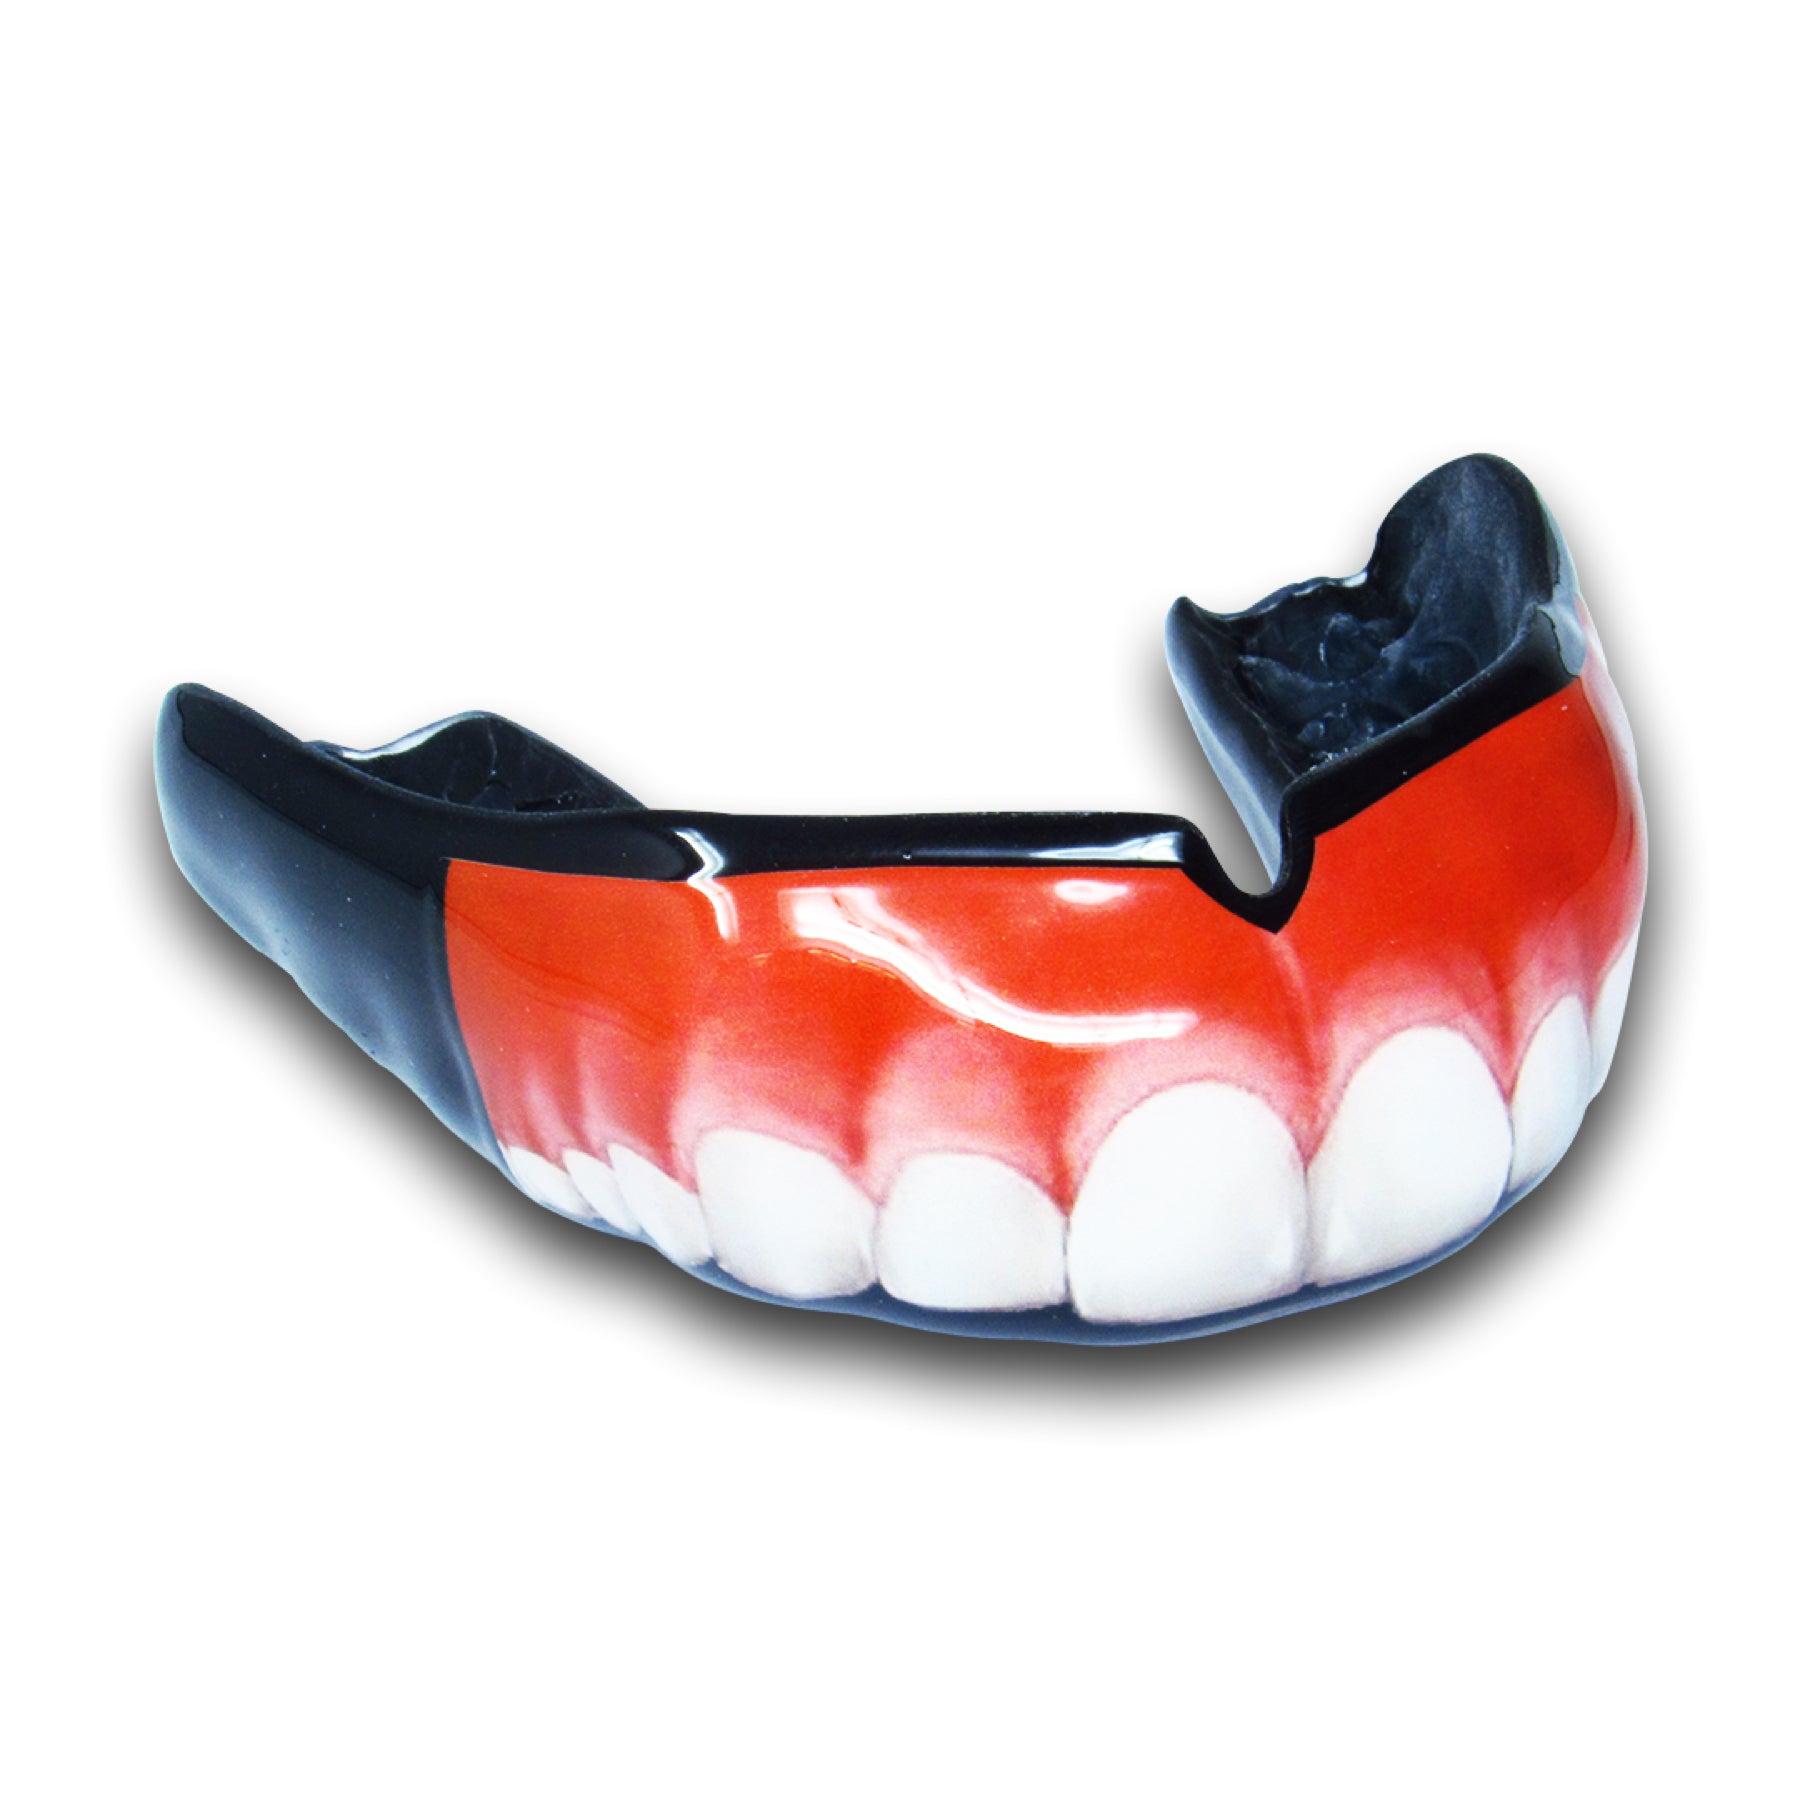  real teeth mouthguards by mouthpiece guy - side 1 view